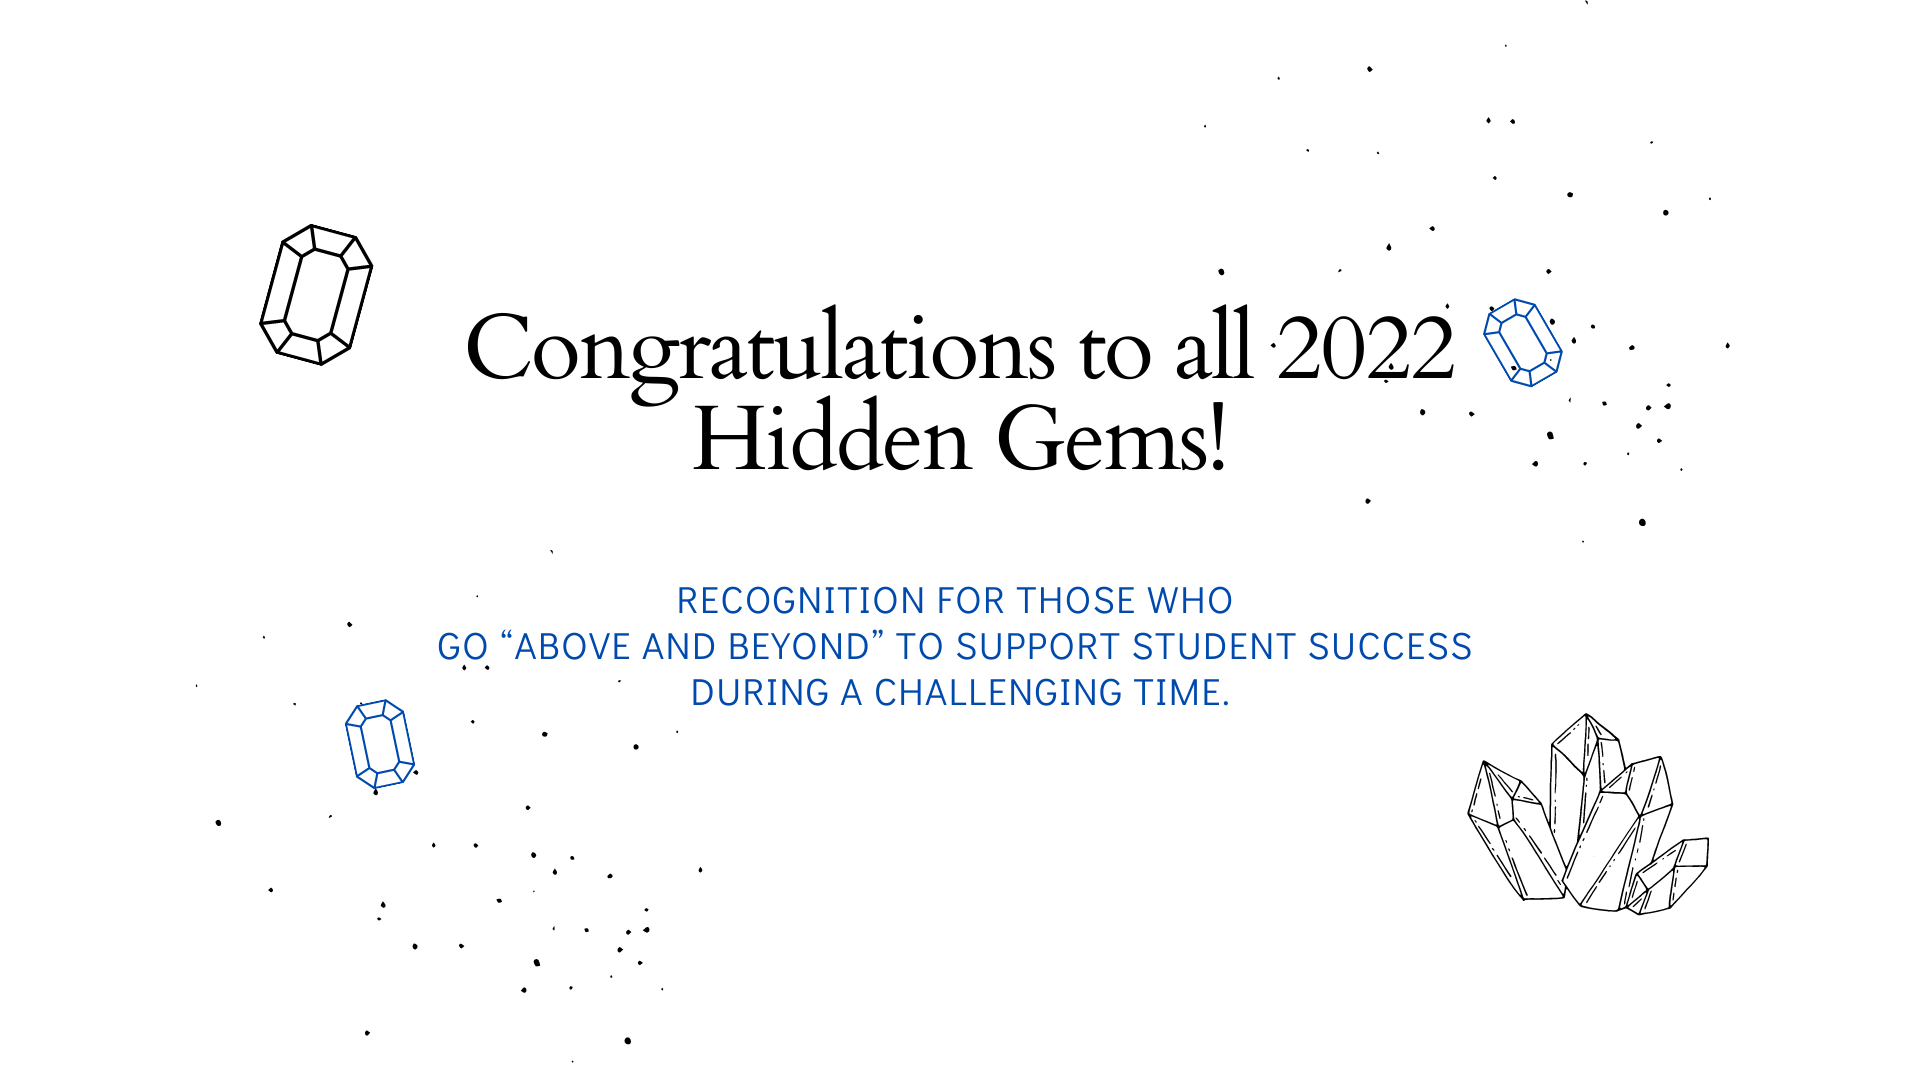 Congratulations to all 2022 Hidden Gems! Recognition for those who support student success during a challenging time. 